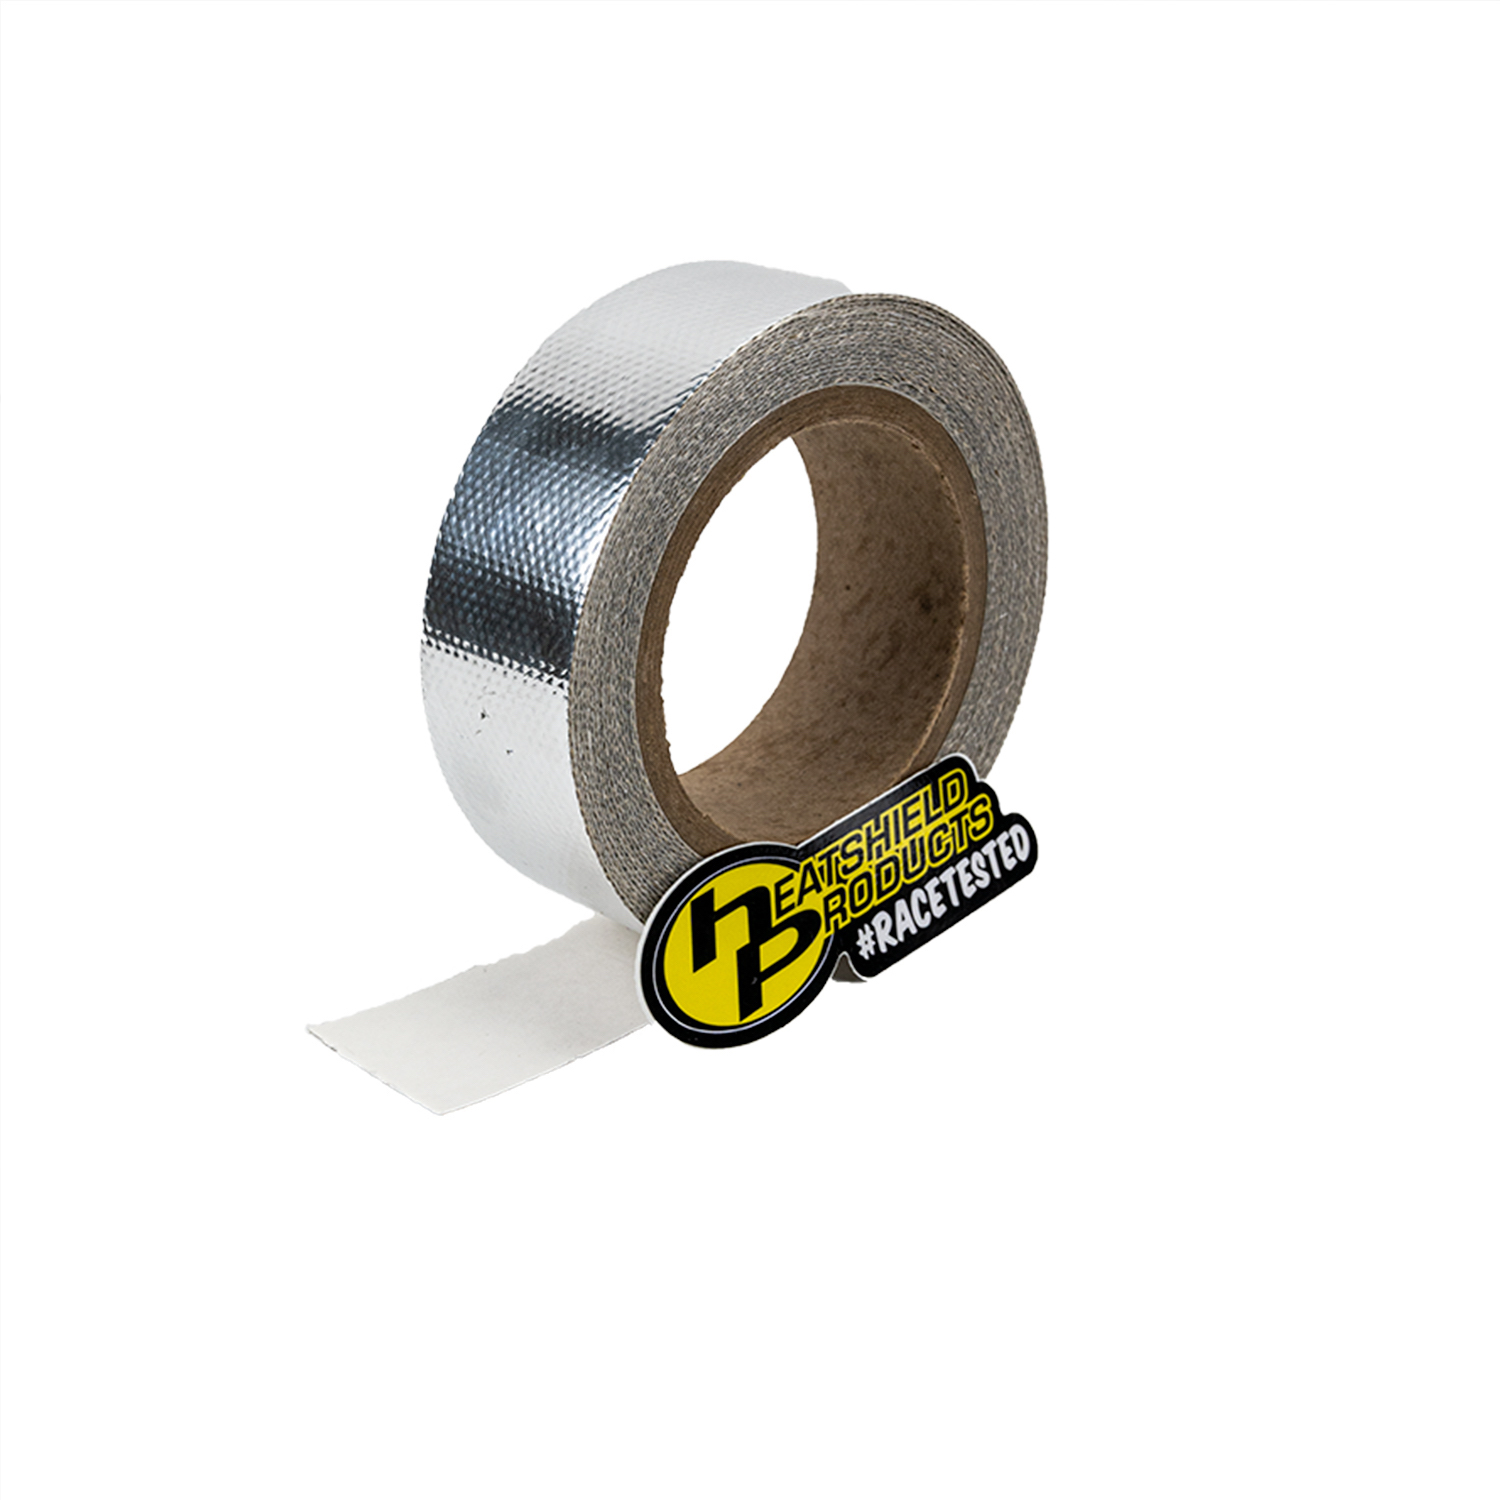 Thermaflect Tape 1-1/2 i n x 20 ft - 340020